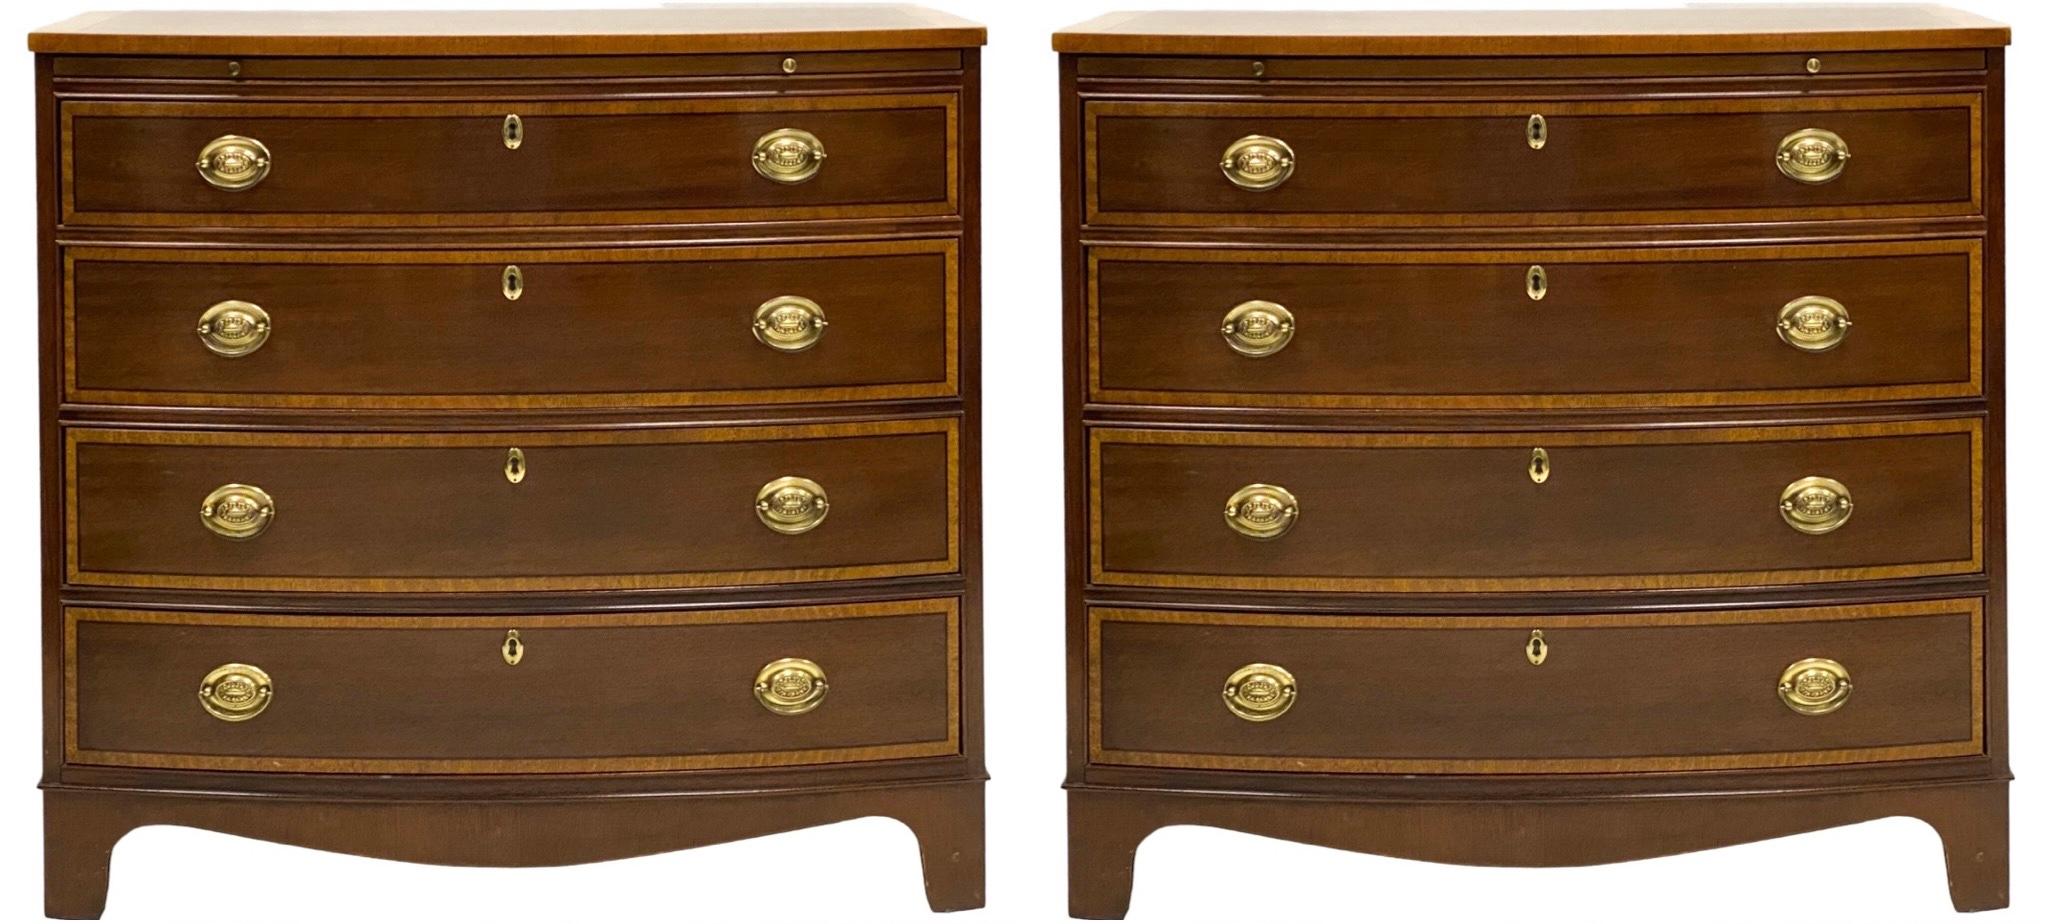 20th Century Federal Style Mahogany Banded W/ Satinwood Chests By Baker Furniture - Pair